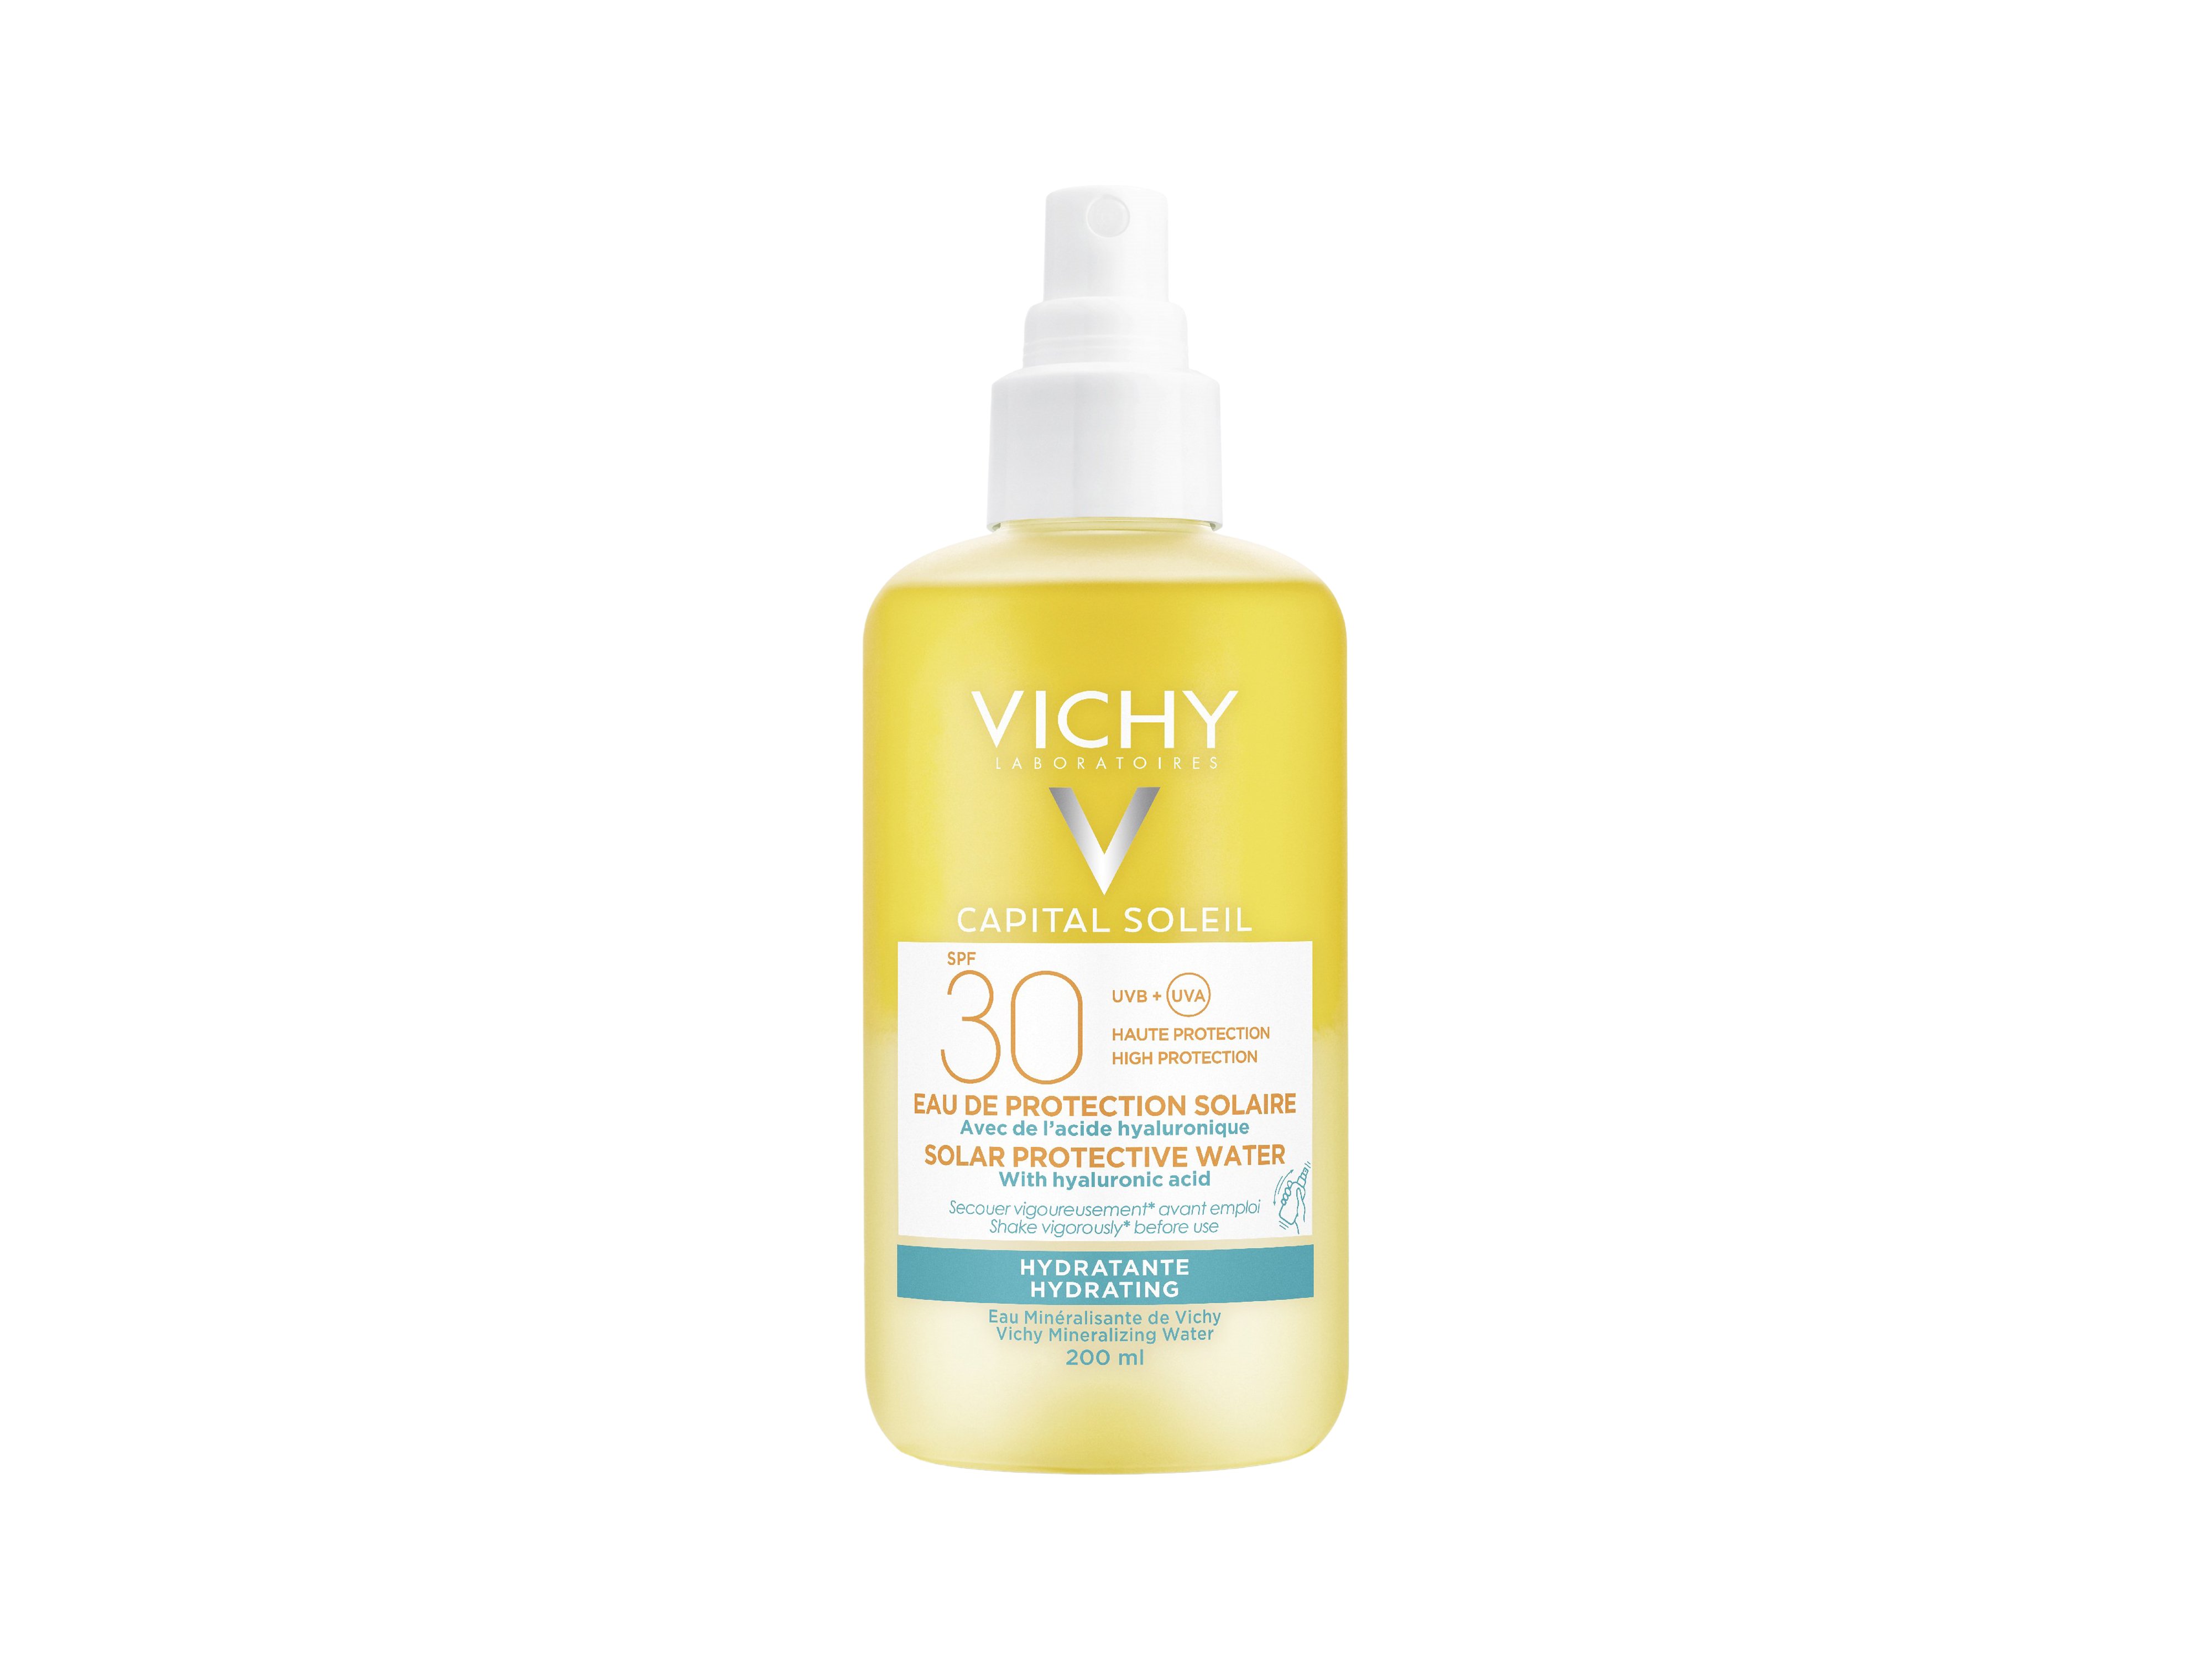 Vichy Capital Soleil Hydrating Protective Water SPF30, 200 ml